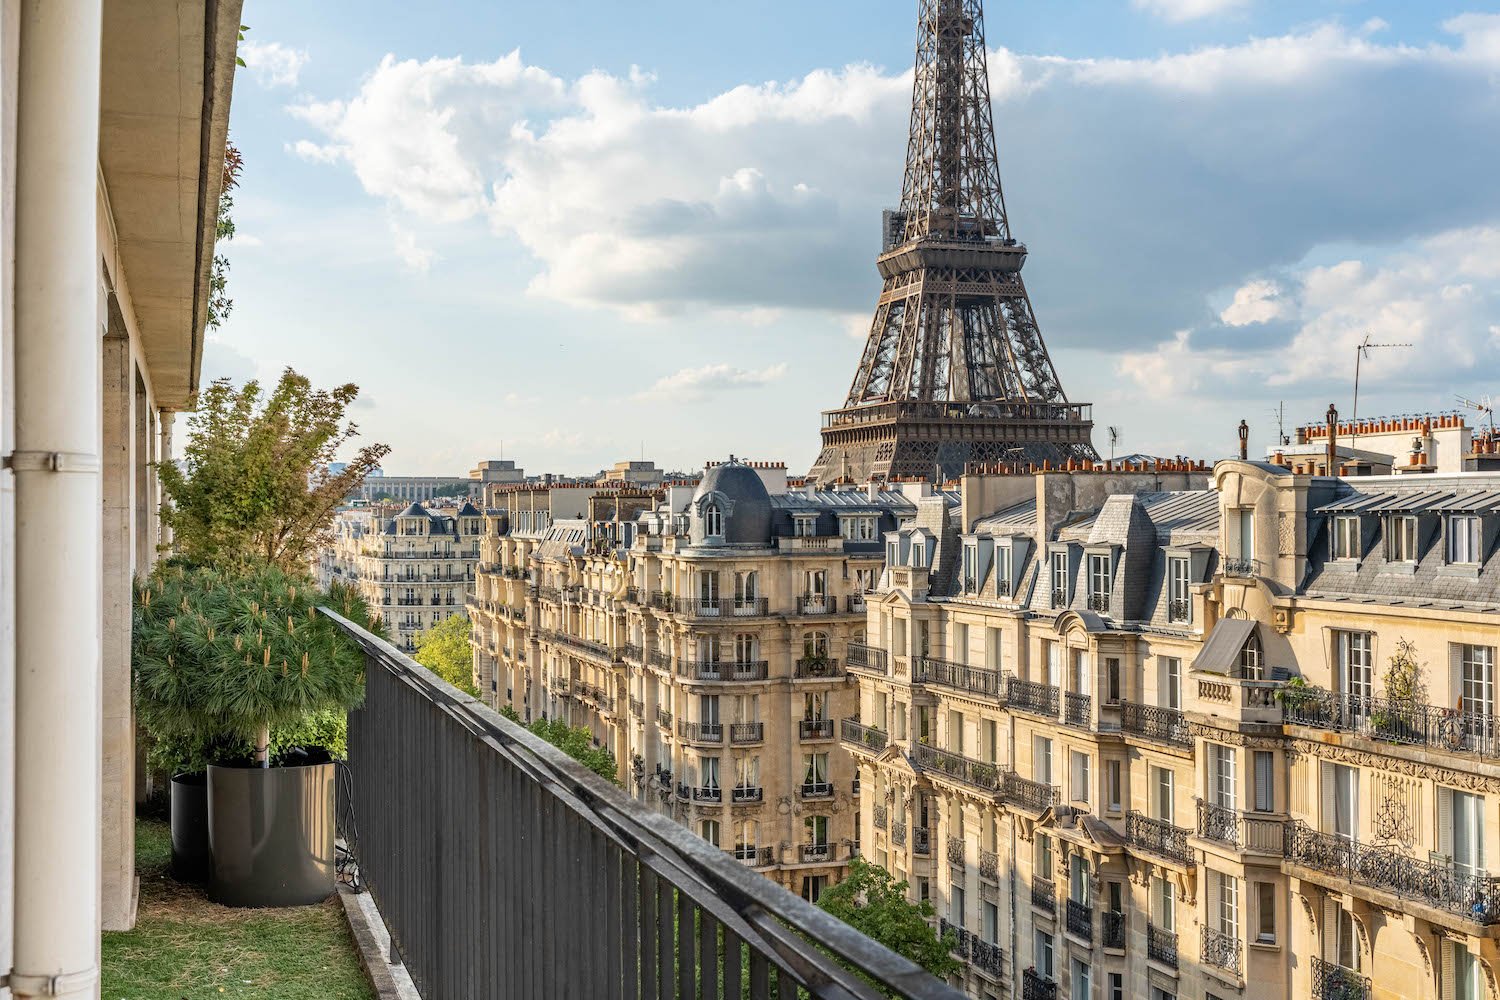 Luxury apartment with rooftop view of the Eiffel Tower